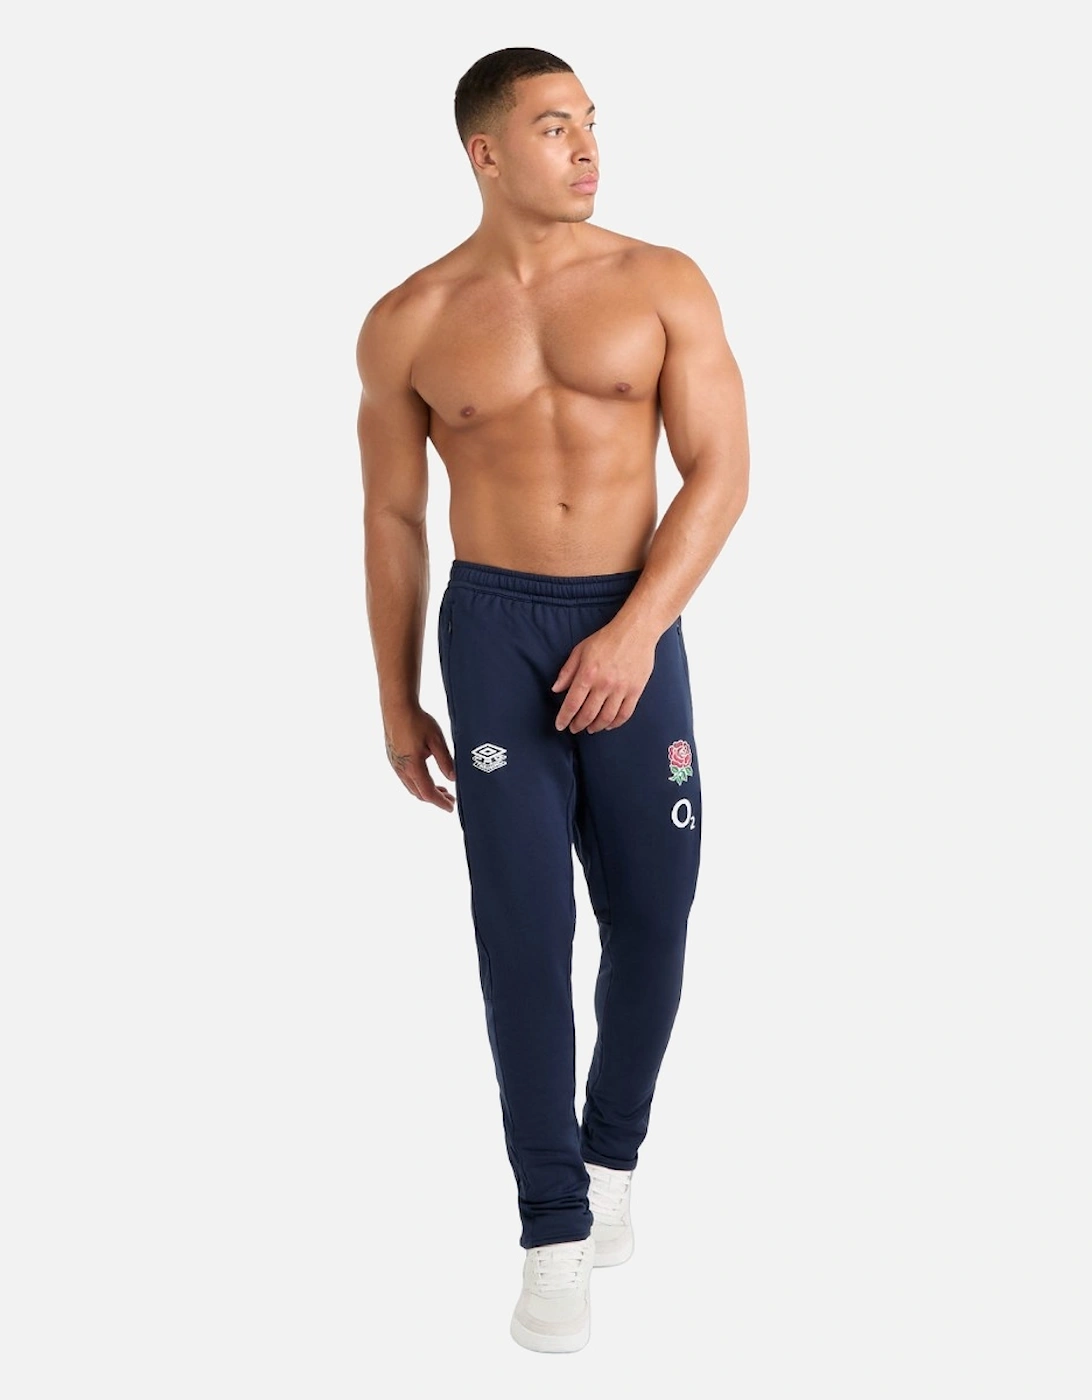 Mens 23/24 England Rugby Tapered Jogging Bottoms